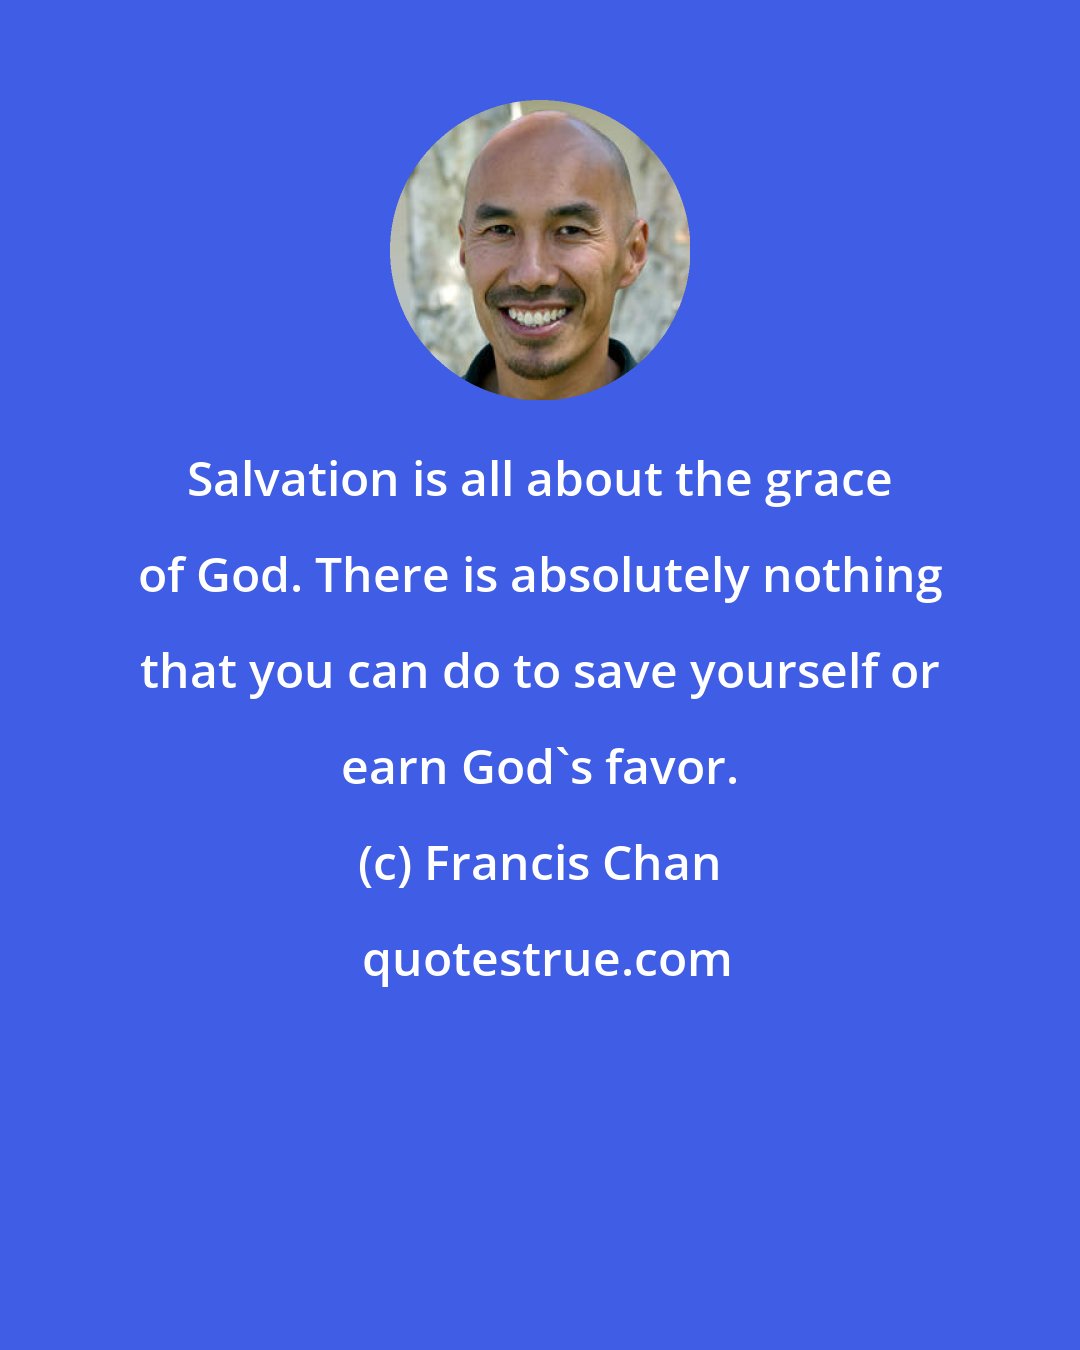 Francis Chan: Salvation is all about the grace of God. There is absolutely nothing that you can do to save yourself or earn God's favor.